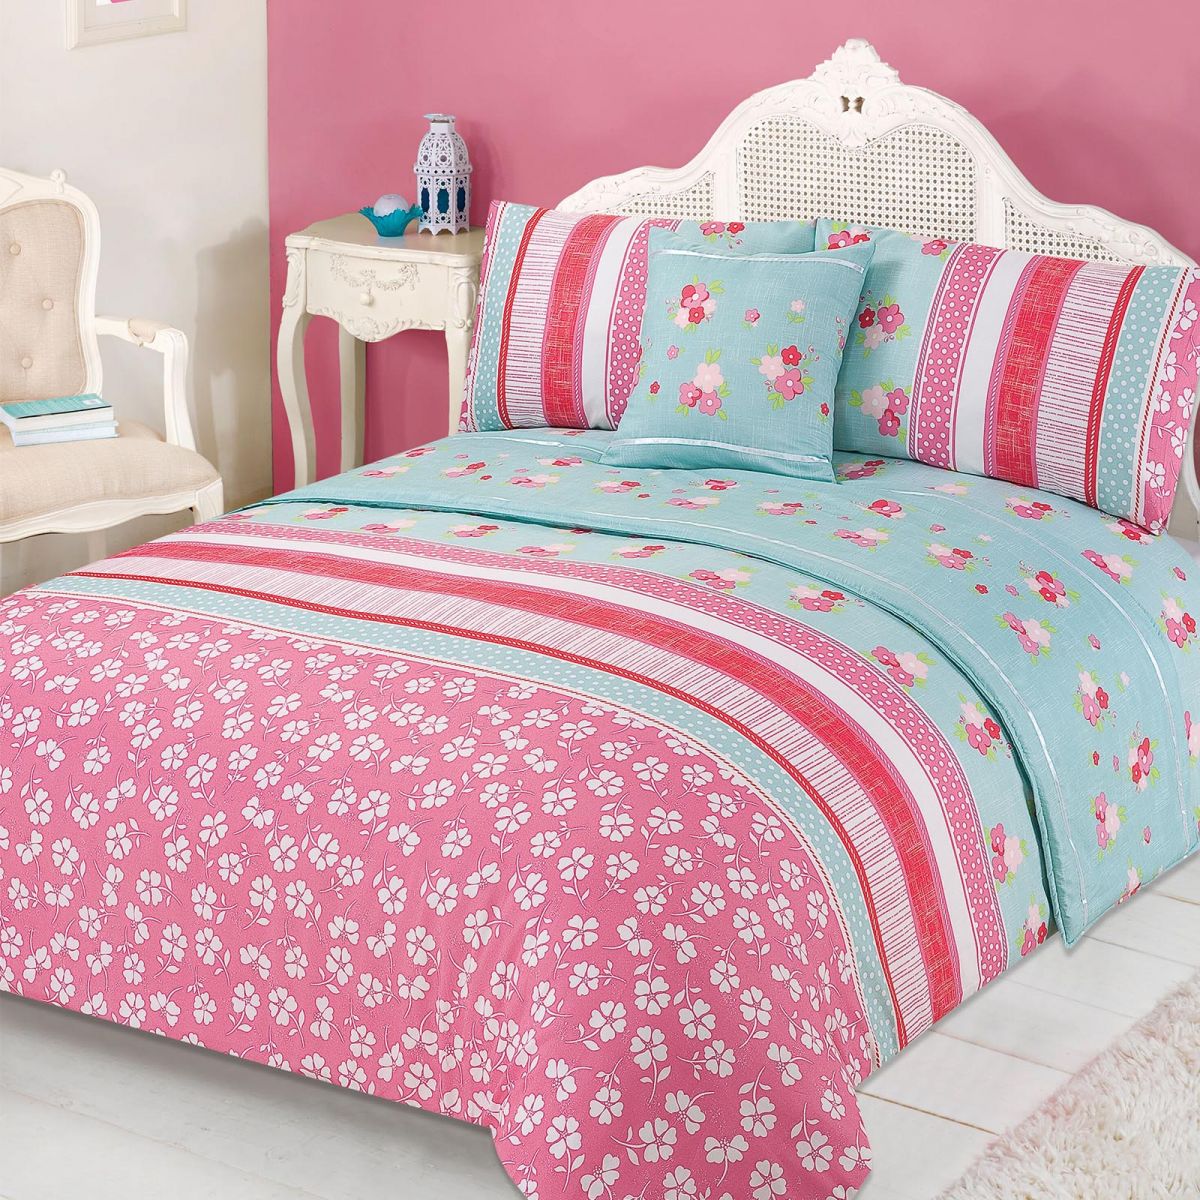 Verity Bed In A Bag Duvet Cover King Size Set - Pink Green